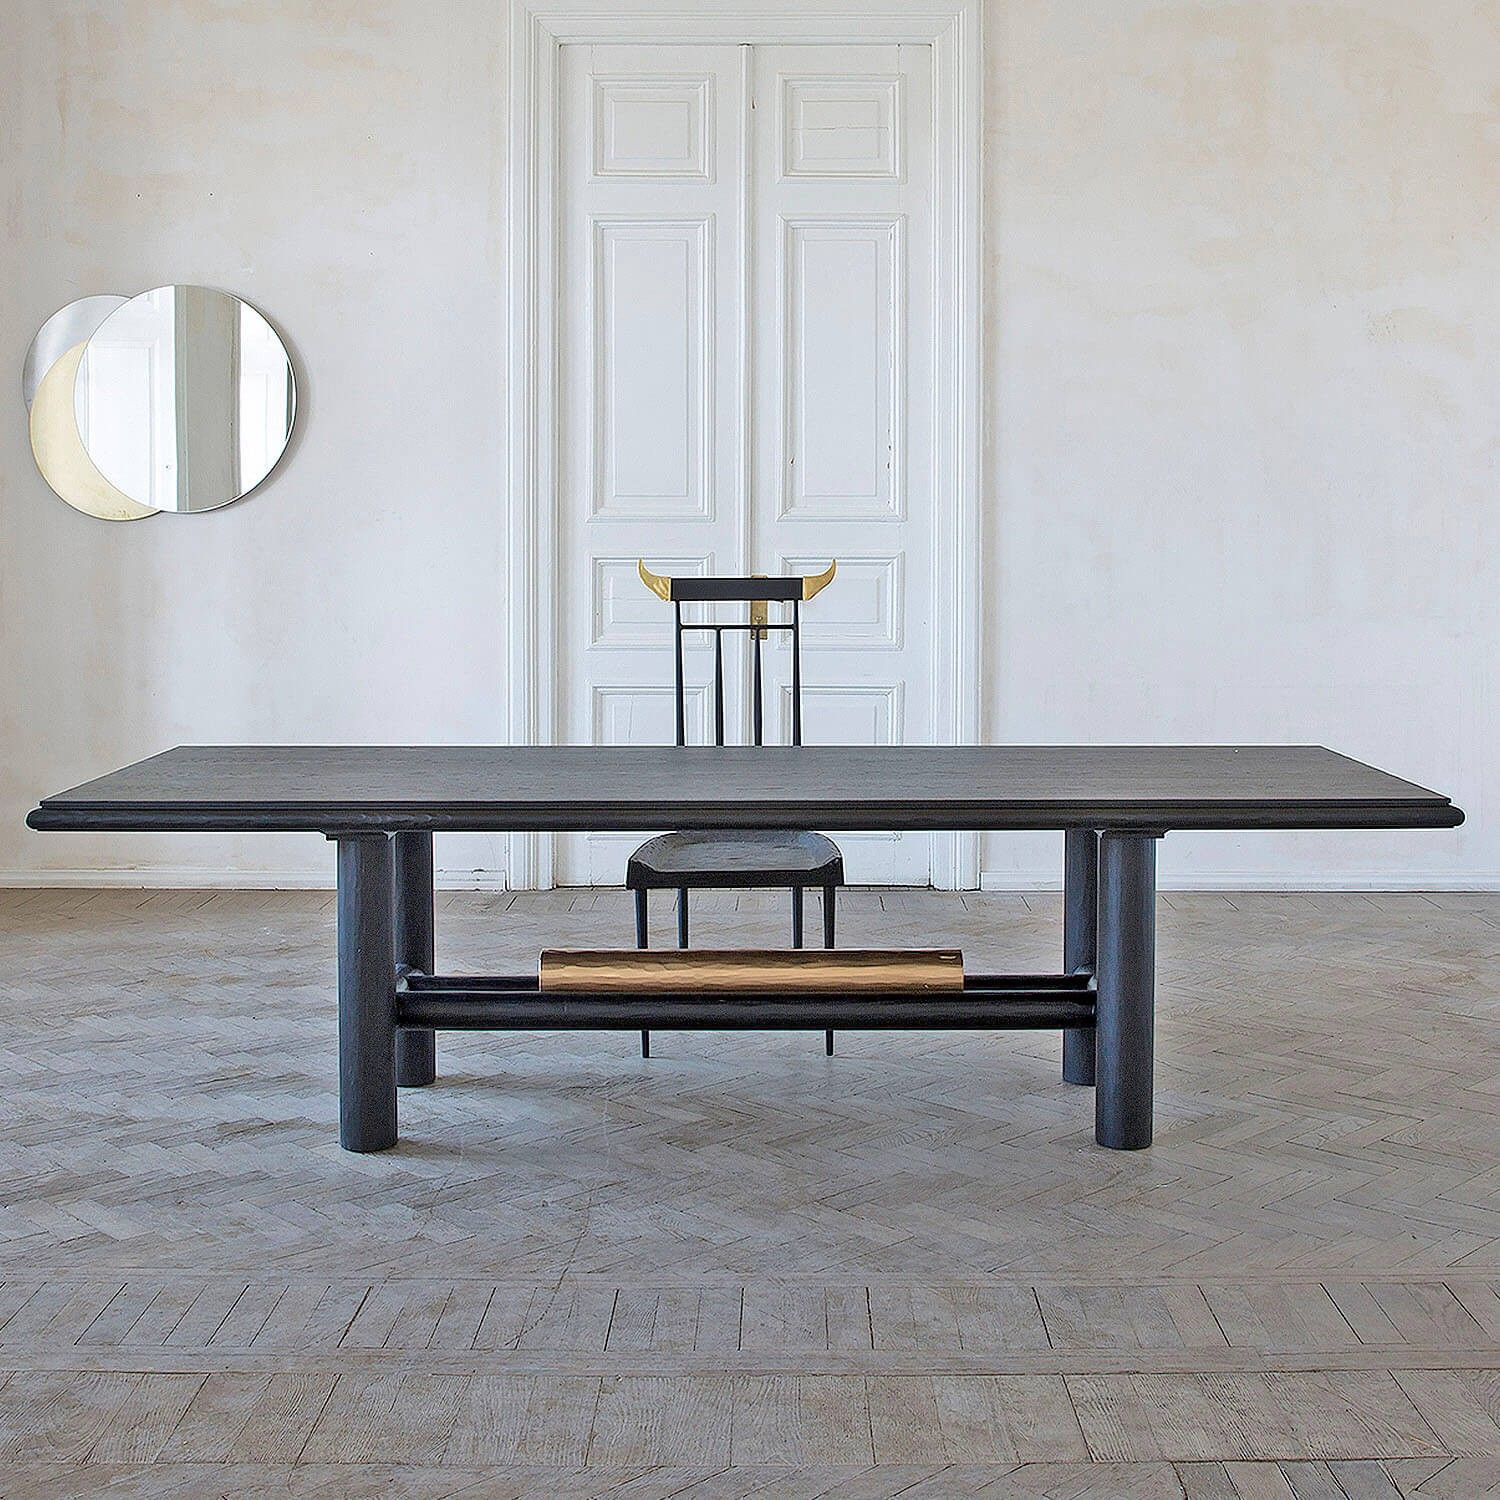 Gold Beam Dining Table | Kooku For Recent Gold Dining Tables (View 14 of 15)